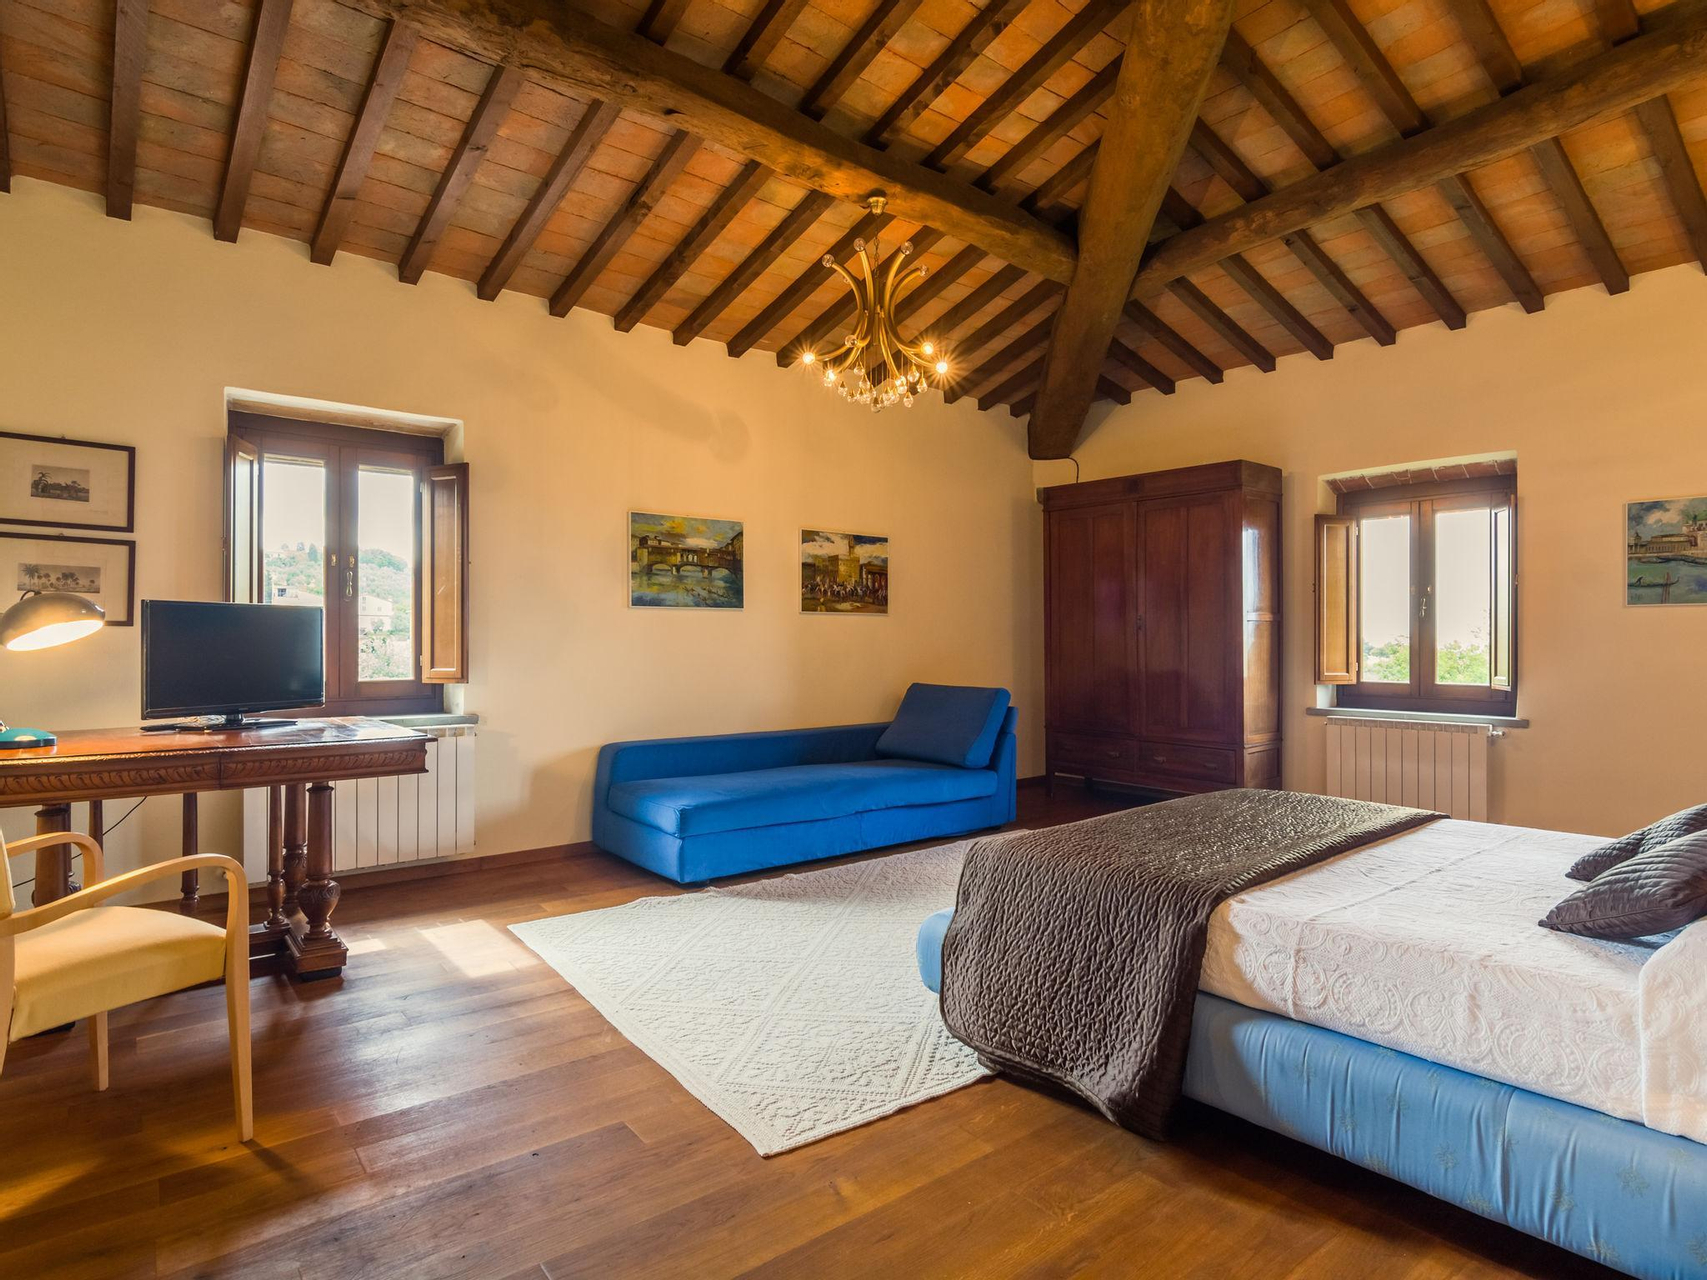 Bedroom 2, Exotic Holiday Home in Vinci with Swimming Pool, Florence